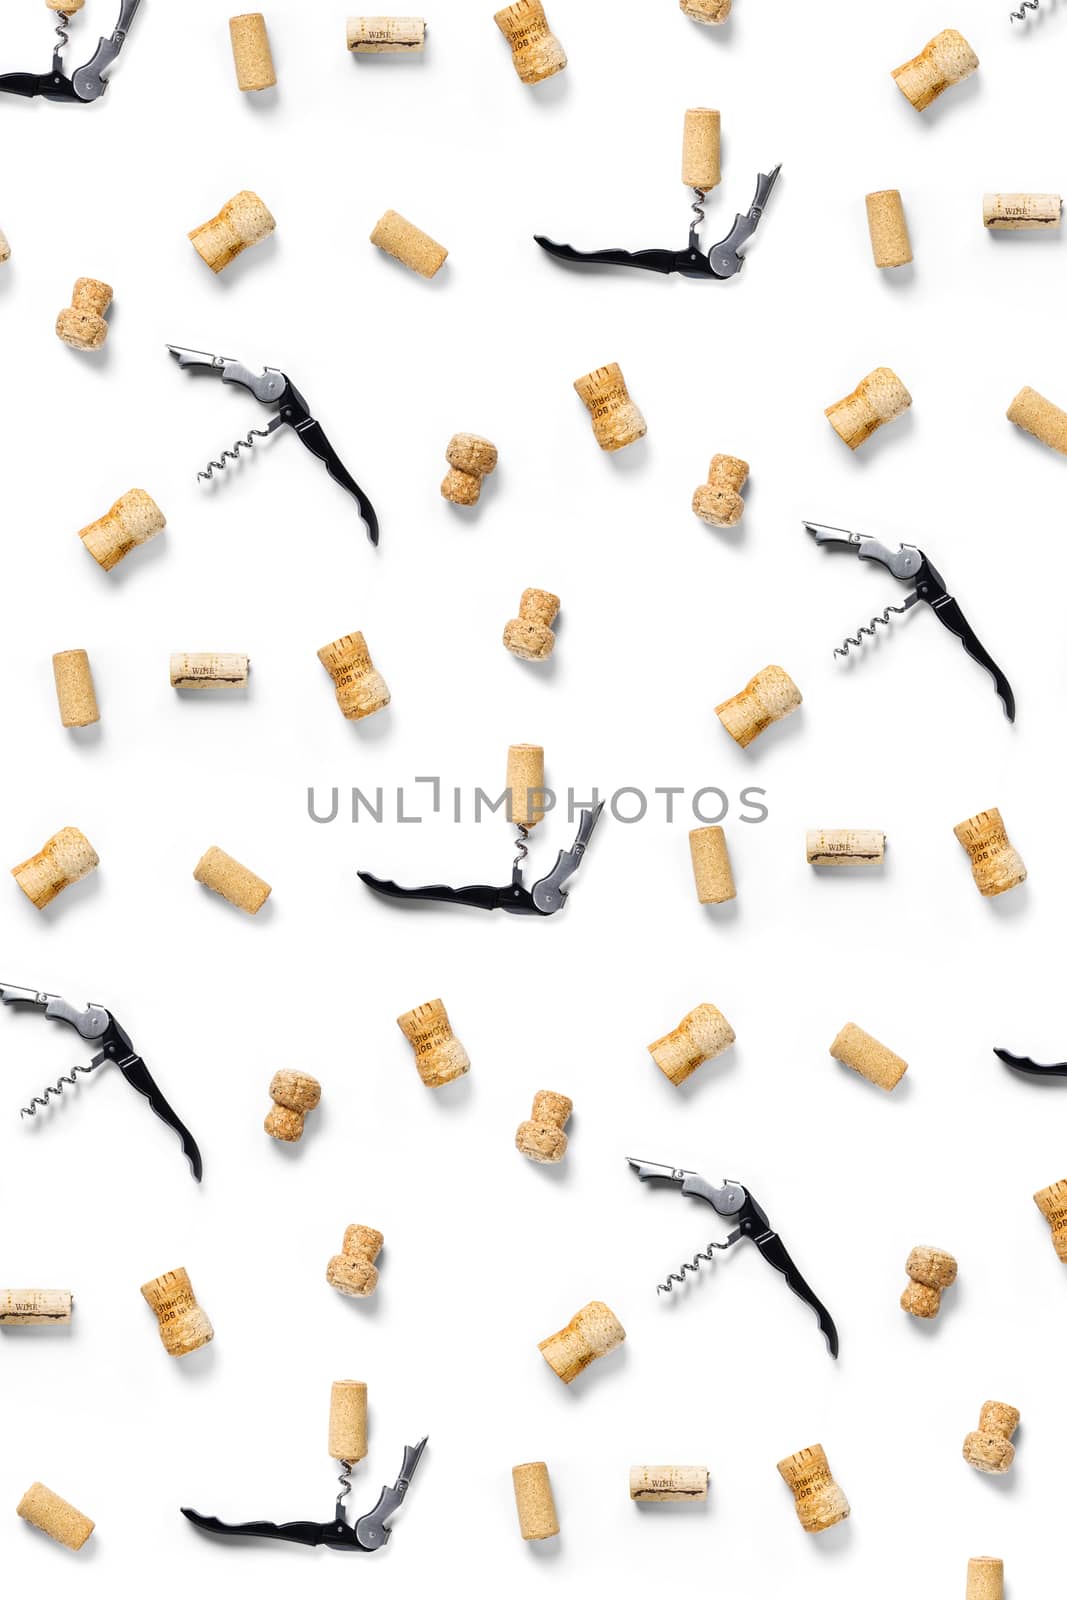 wine corks background on a white backlit background. wine background with corks and corkscrew for fabric print, paper print, wallpapers, design. by PhotoTime